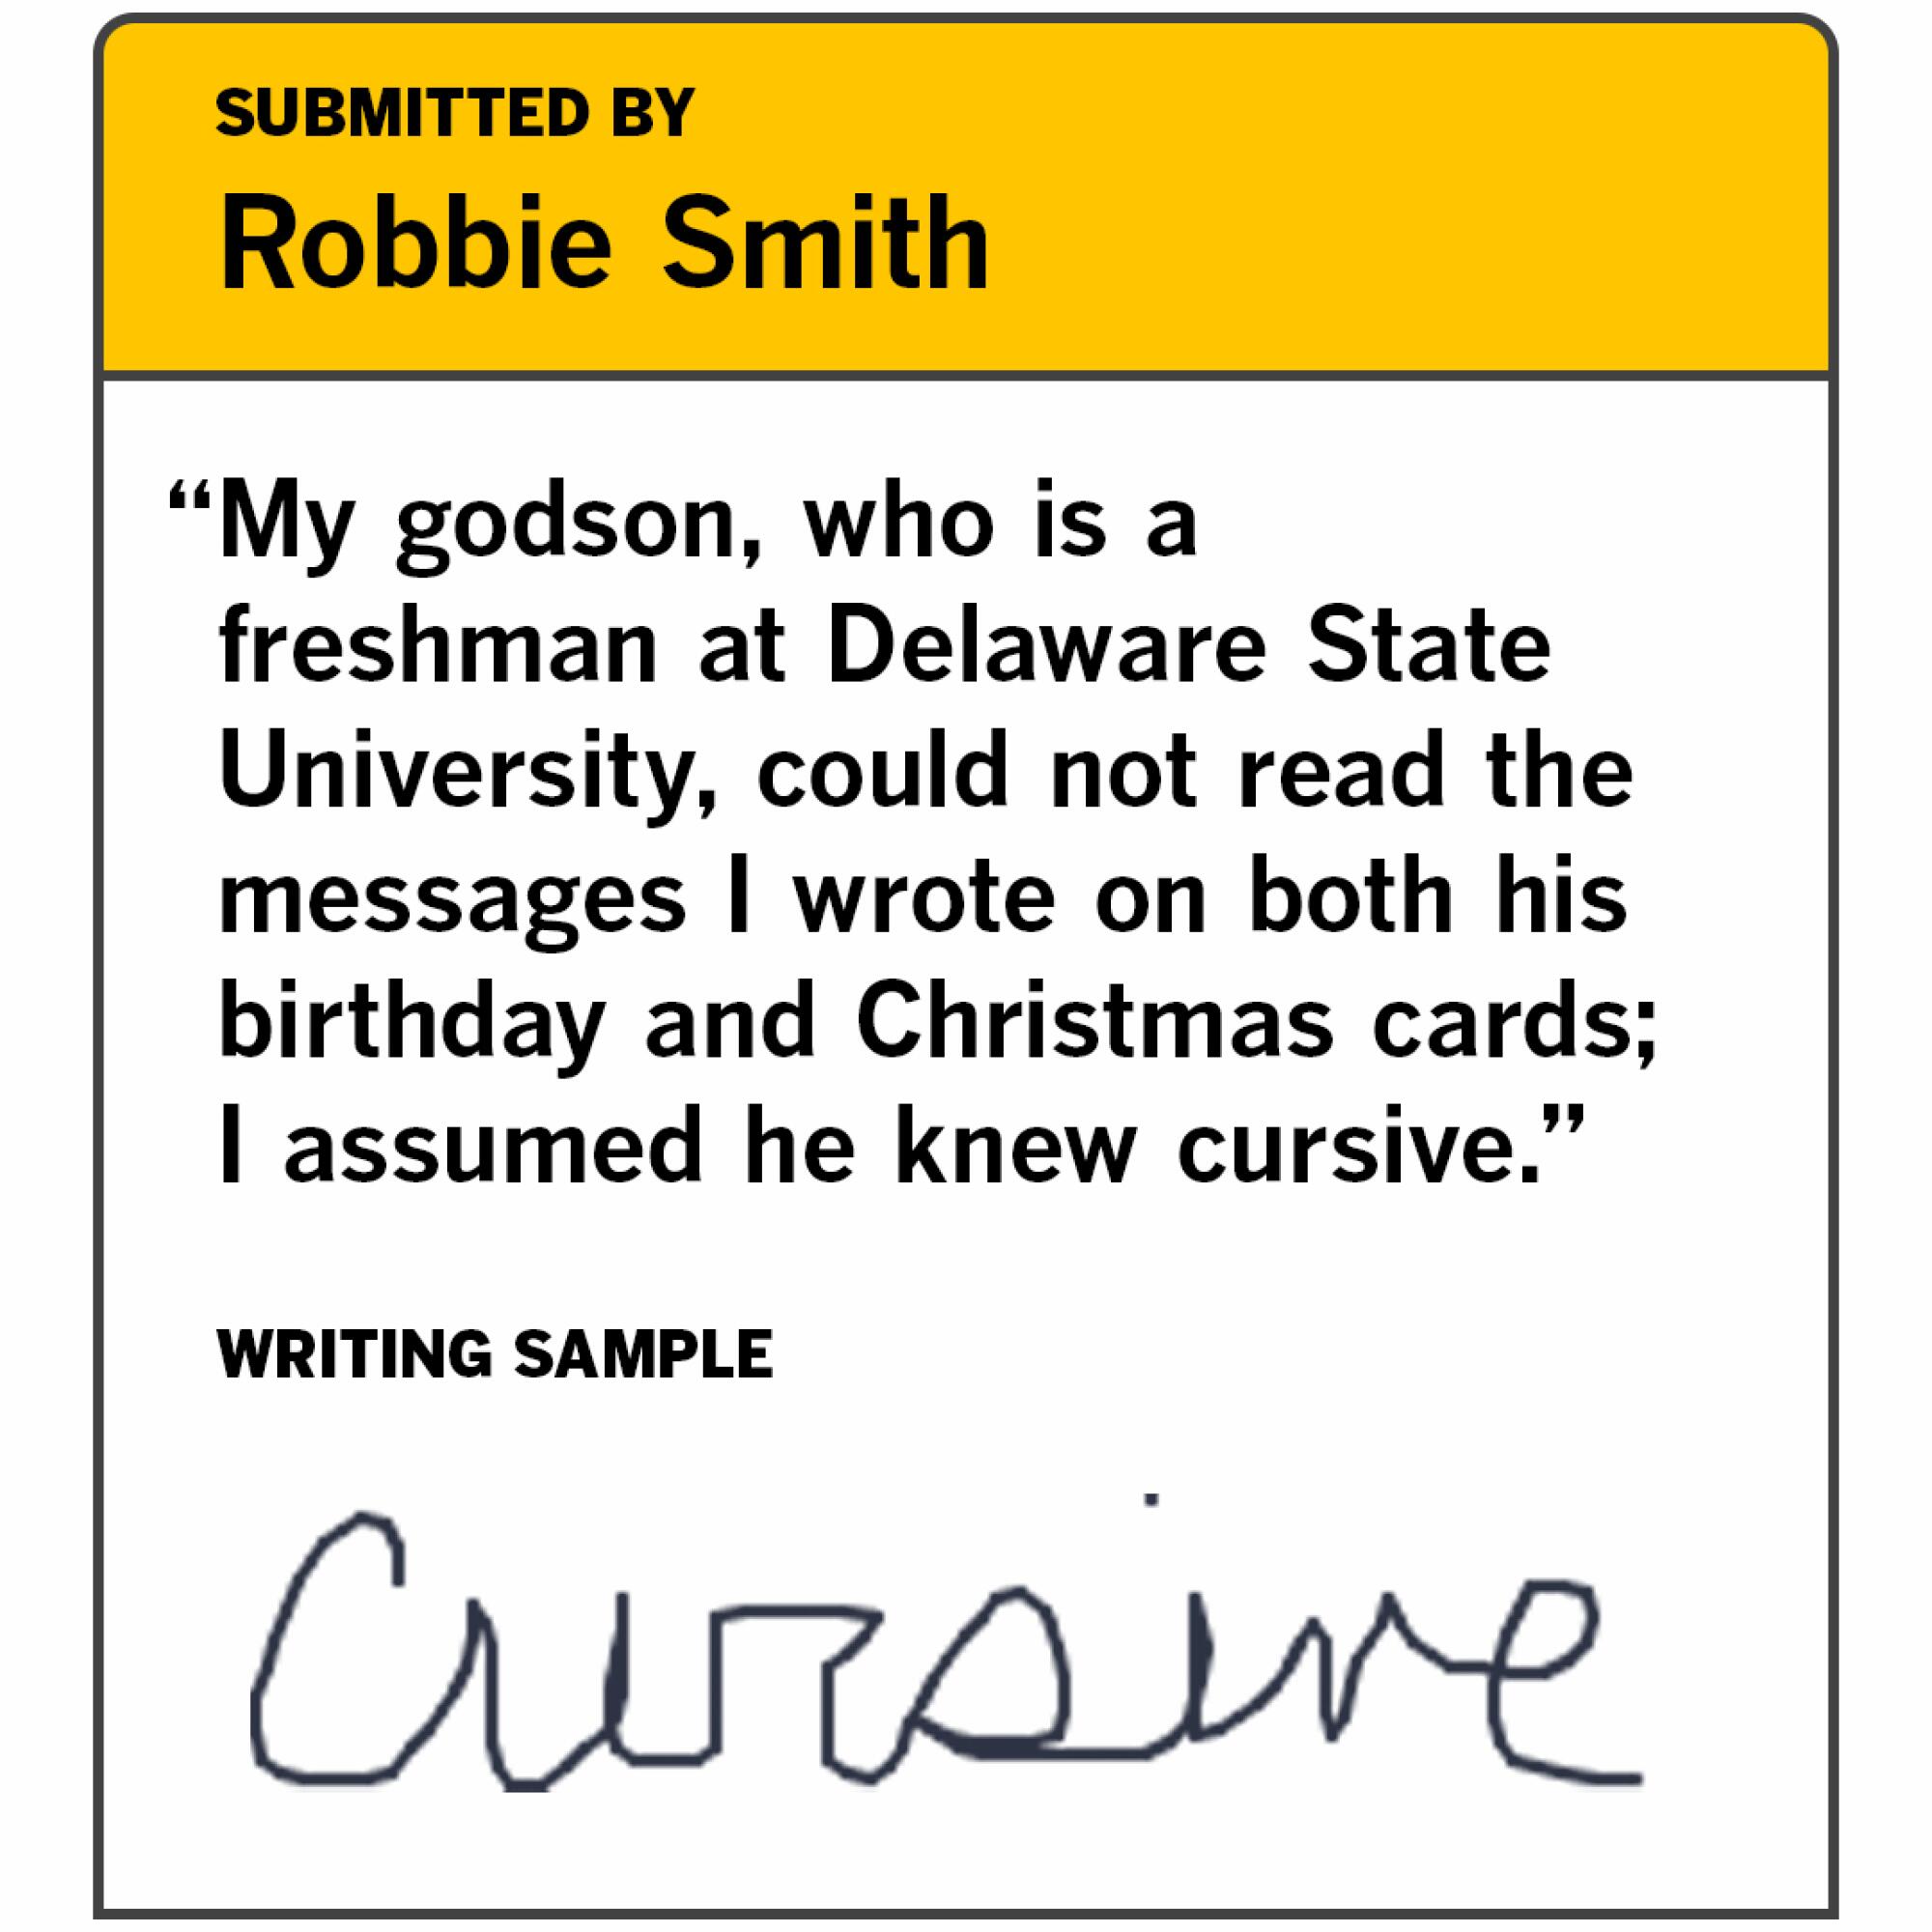 Cursive example from Robbie Smith